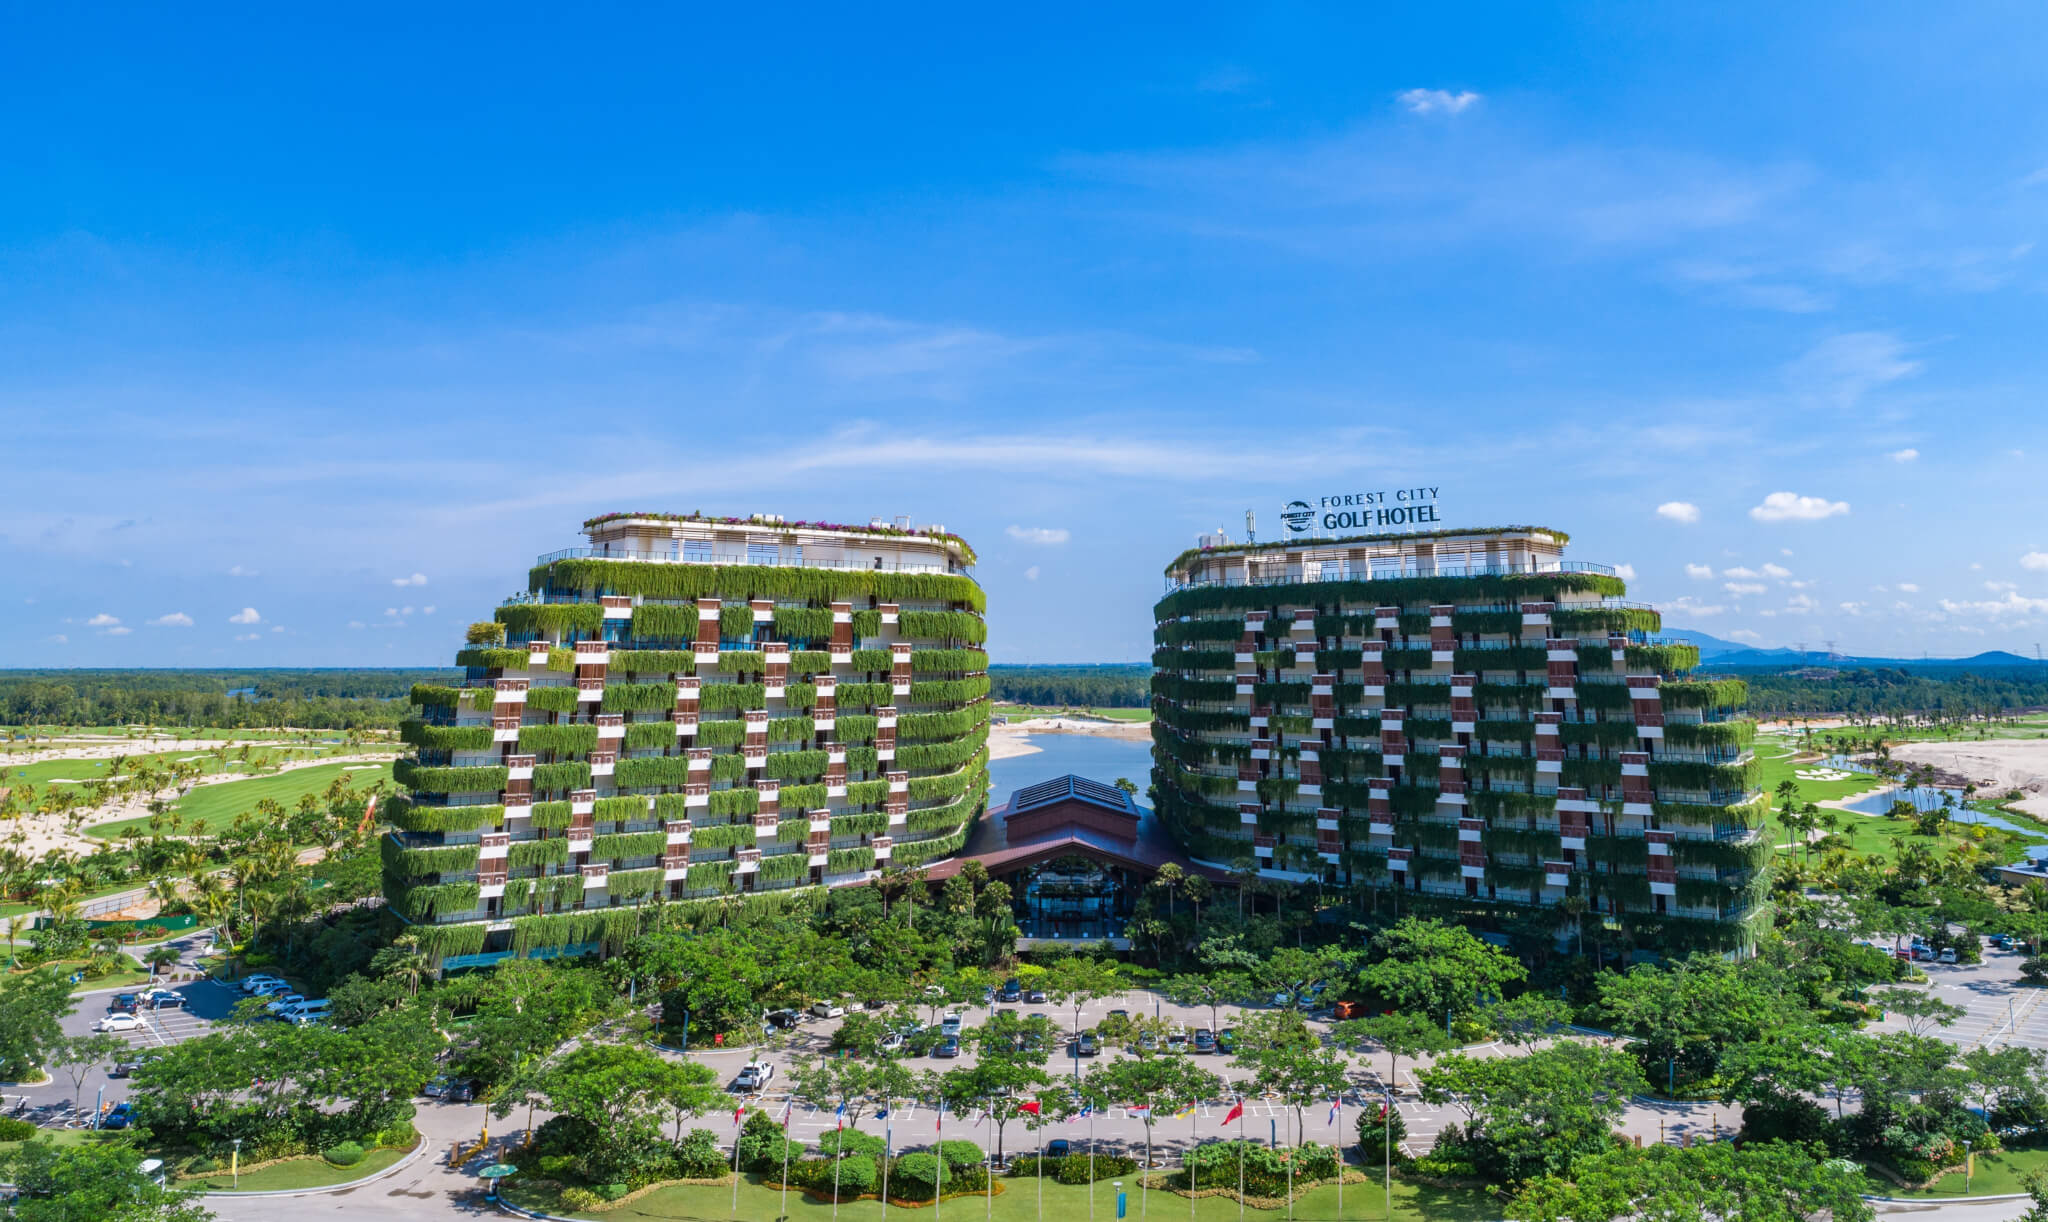 Golf hotel city forest Forest City